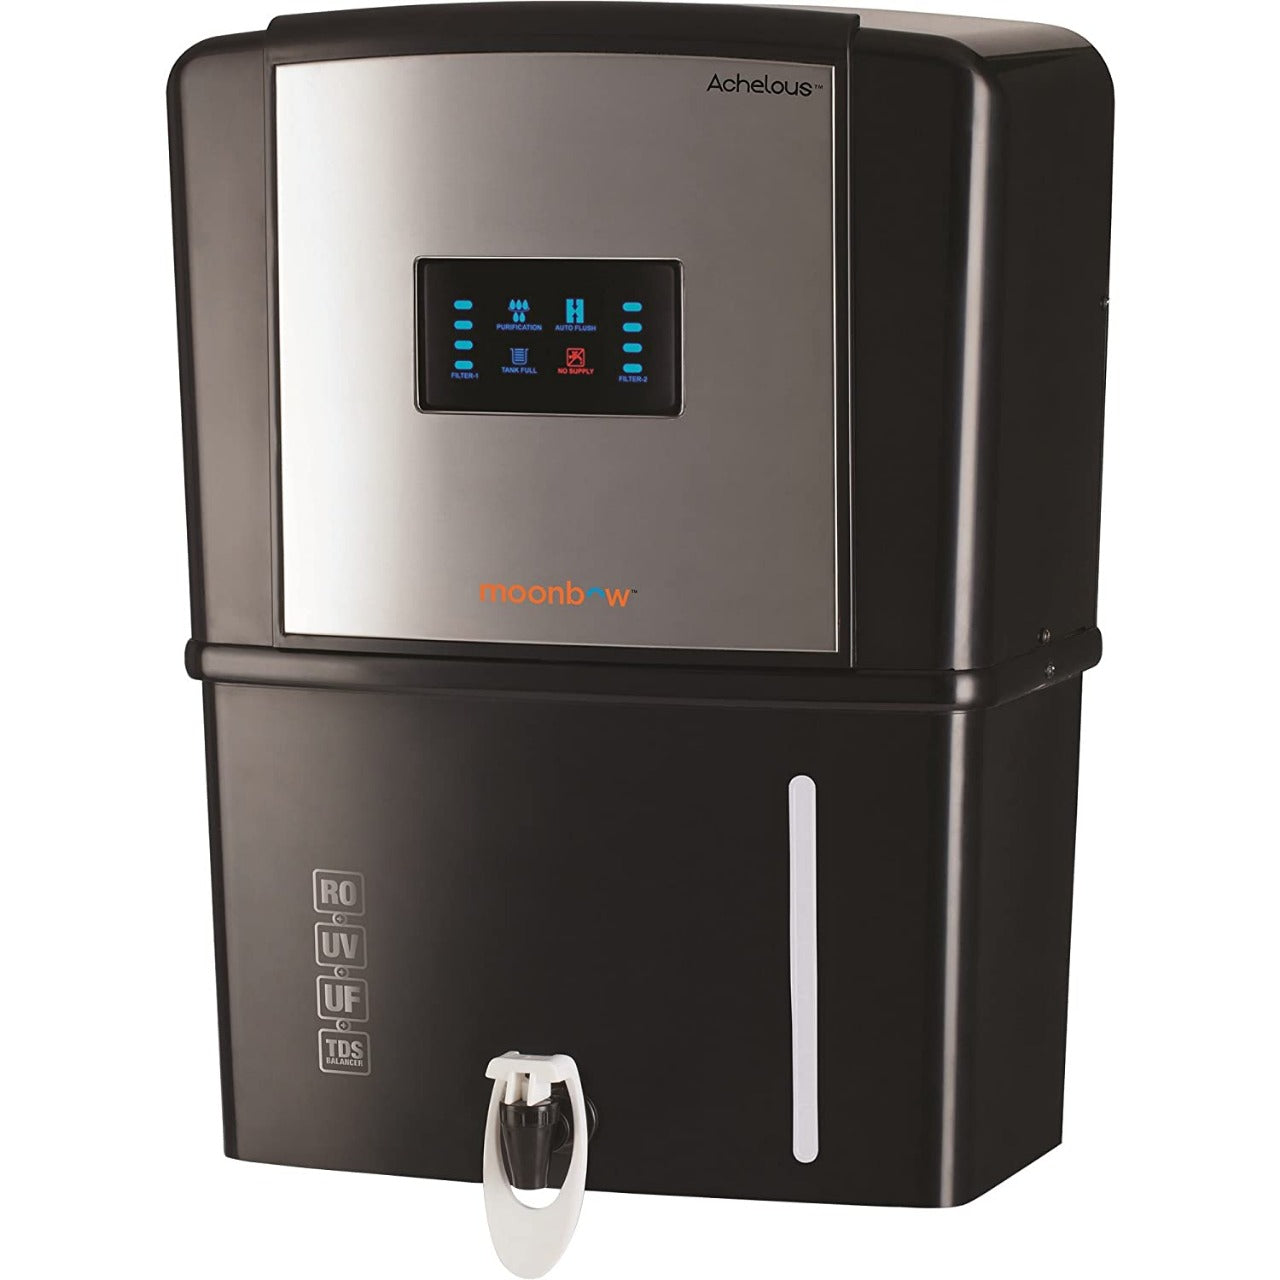 Moonbow by Hindware Achelous 9 L RO + UV + UF + TDS Water Purifier  (Black)